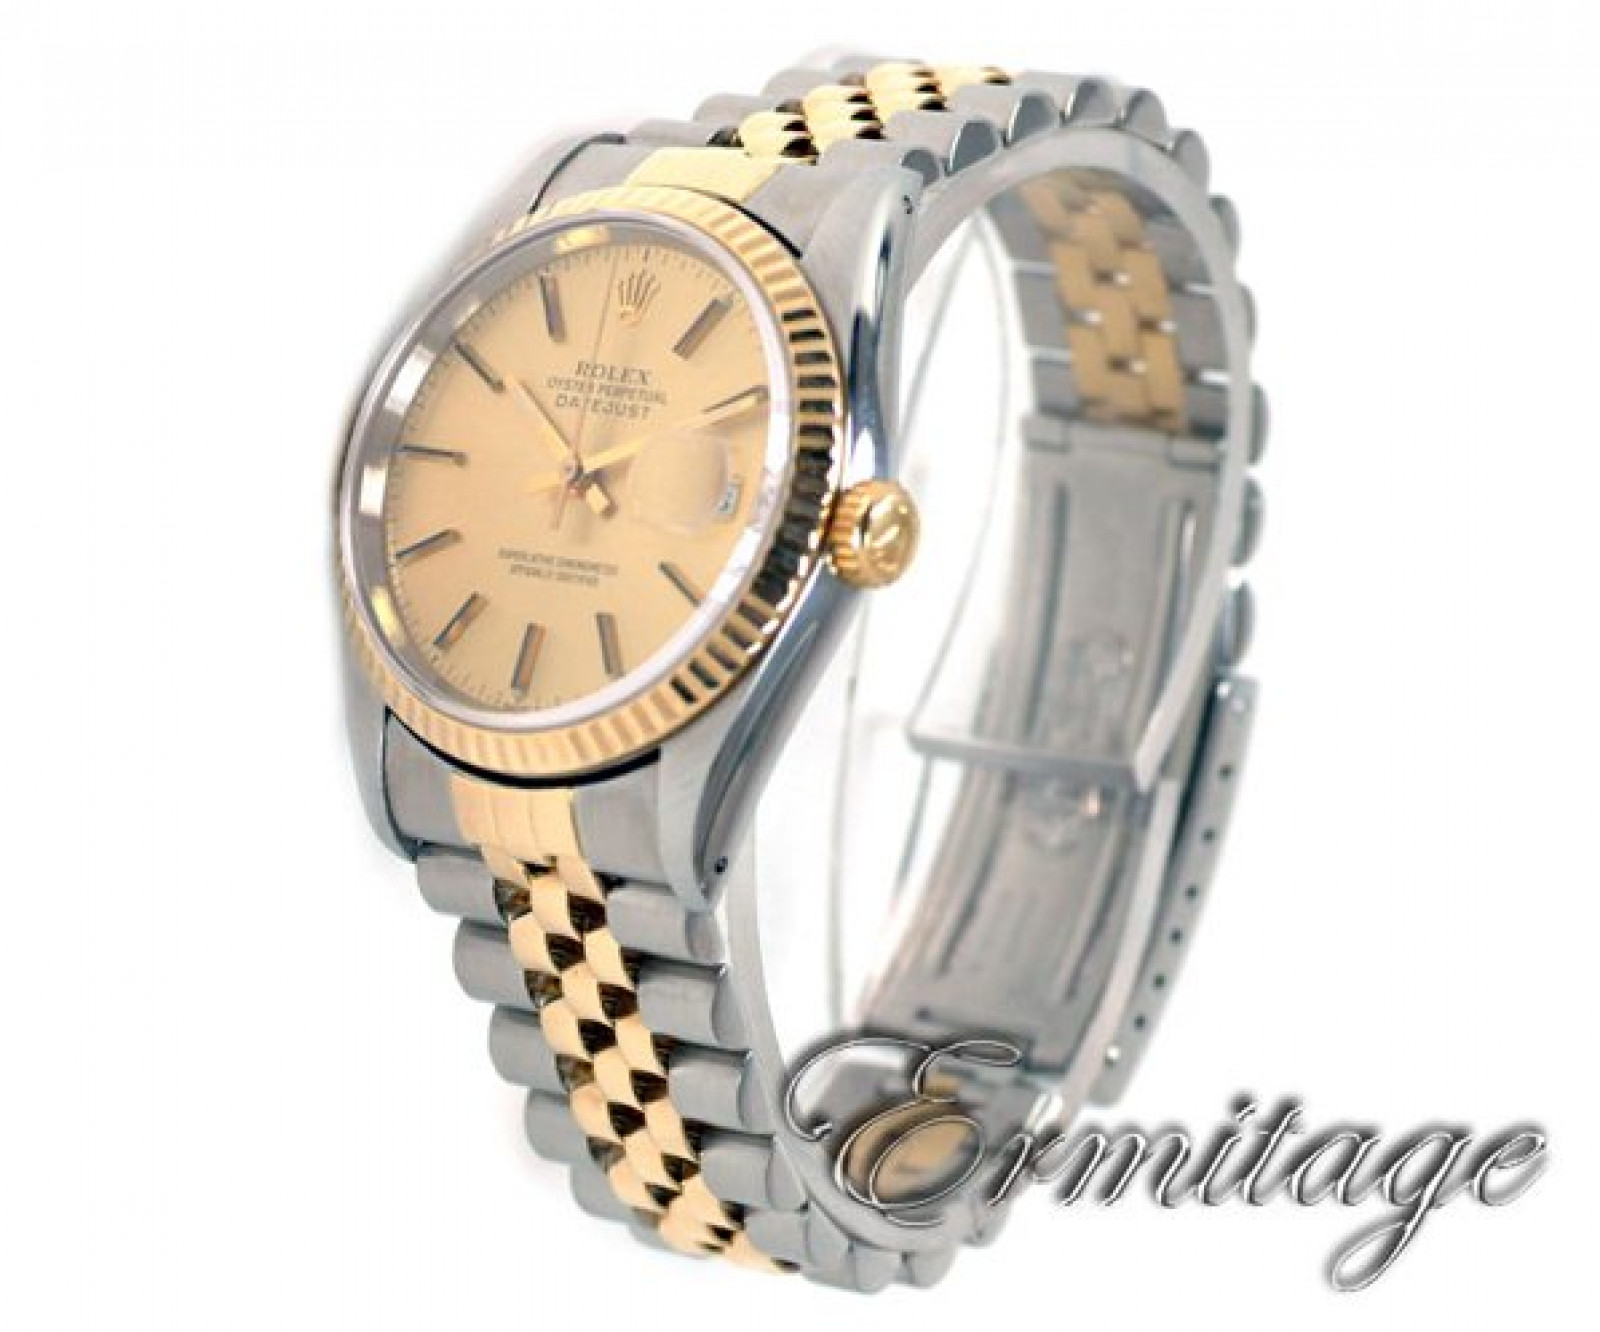 Sell Rolex Datejust 16233 Gold & Steel Today